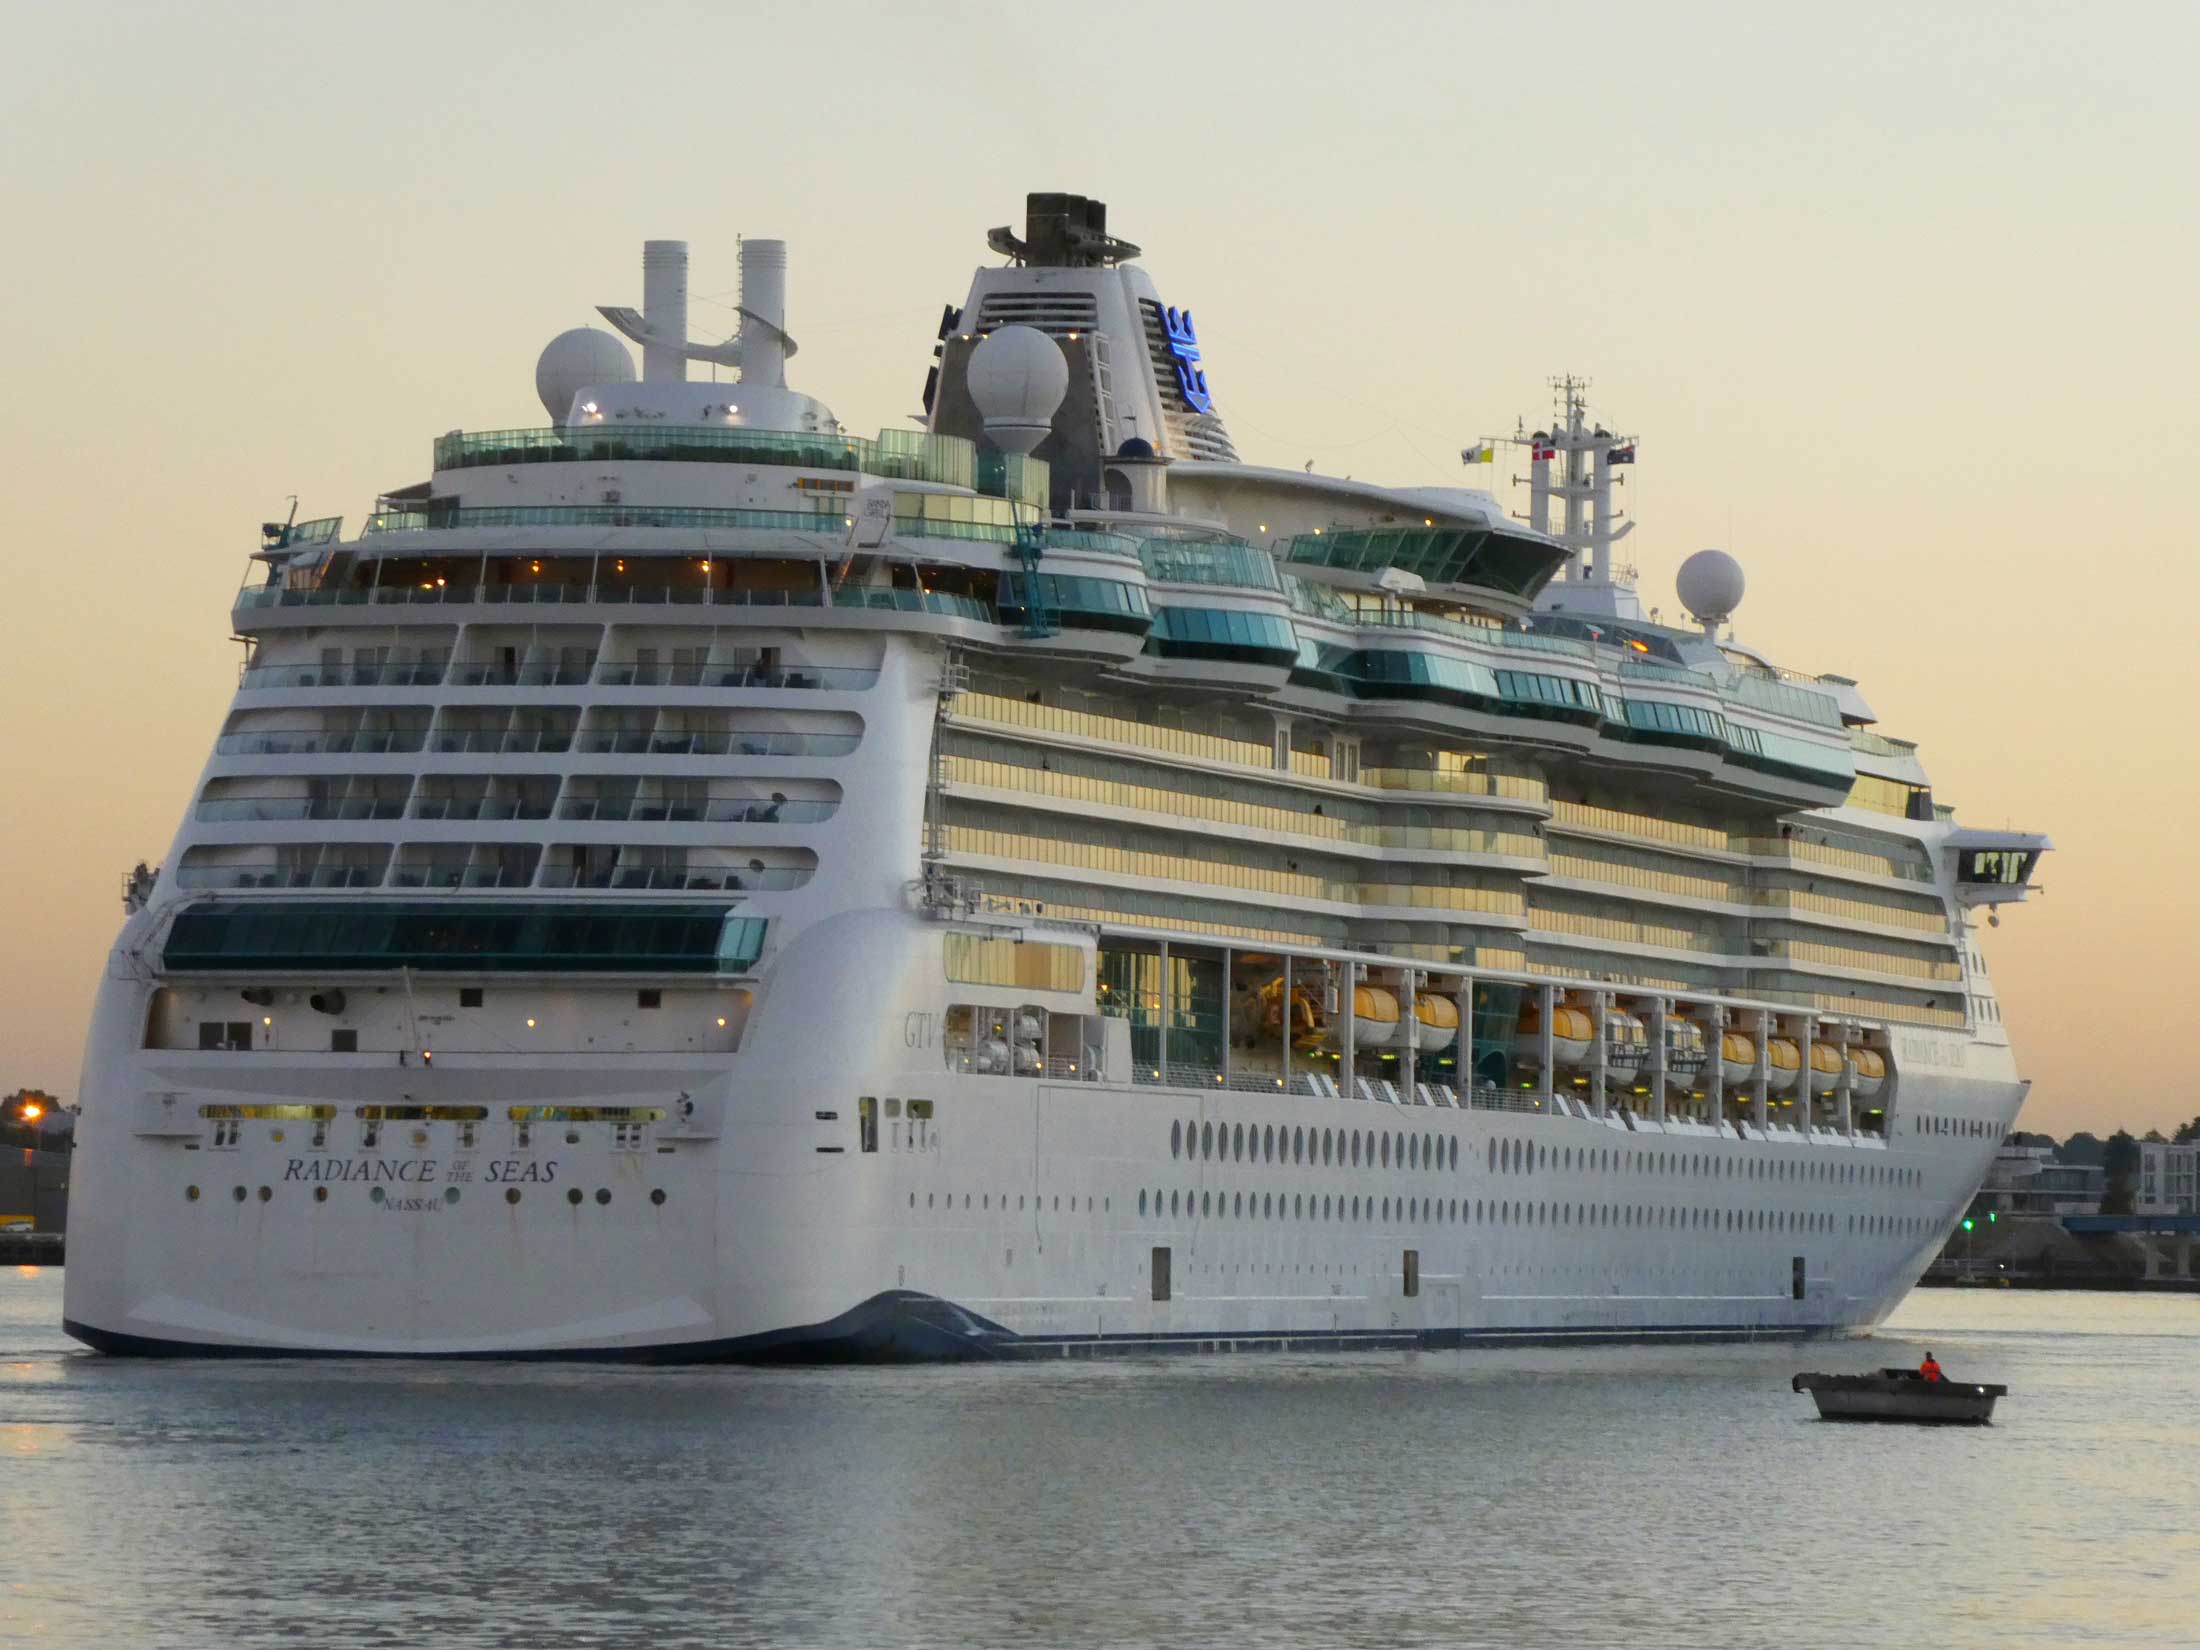 MS Radiance of the Seas - Ships in Fremantle Port - Fremantle Shipping News